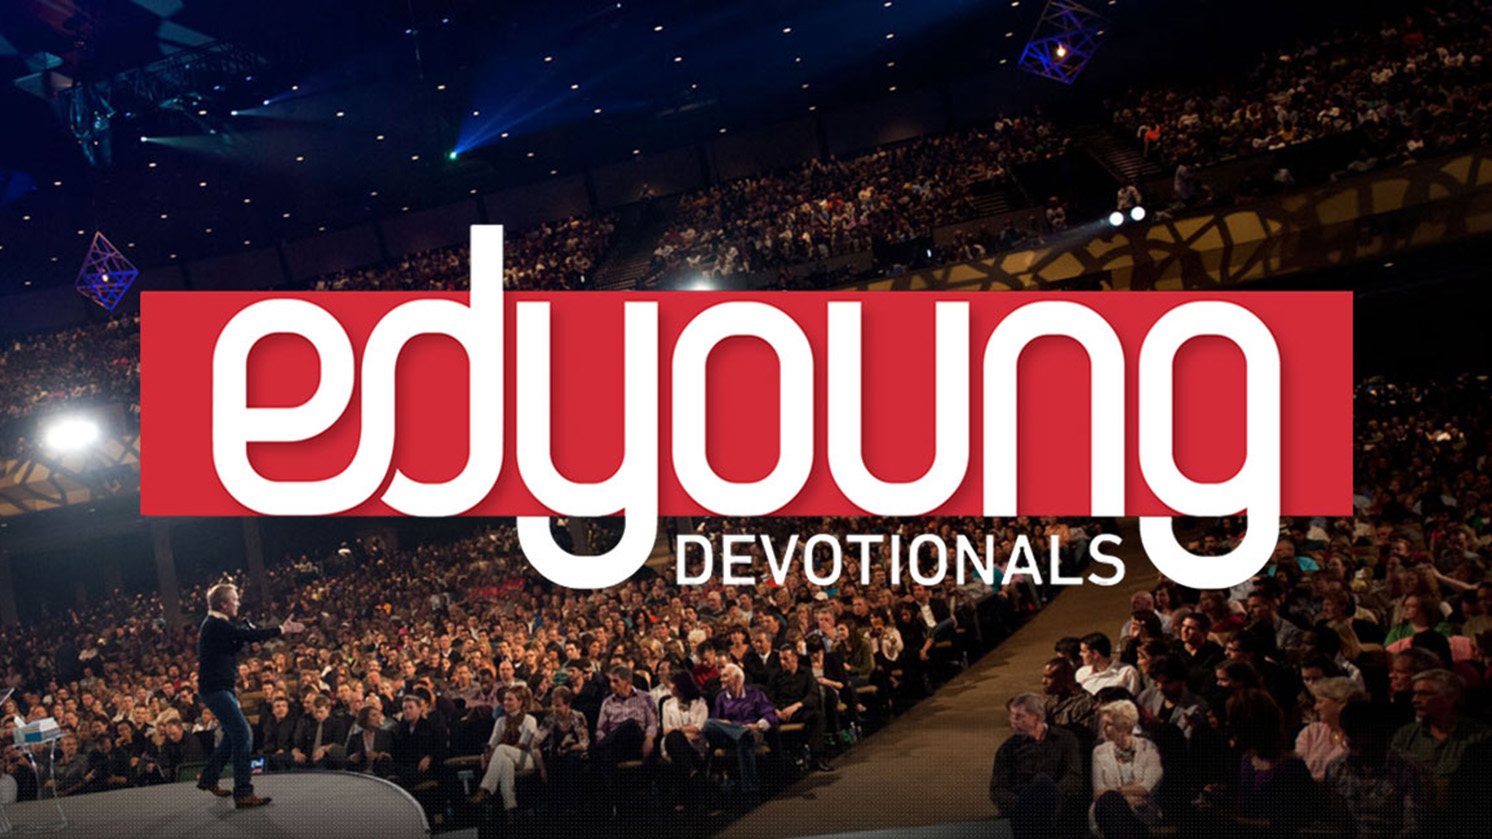 Ed Young Daily Devotionals